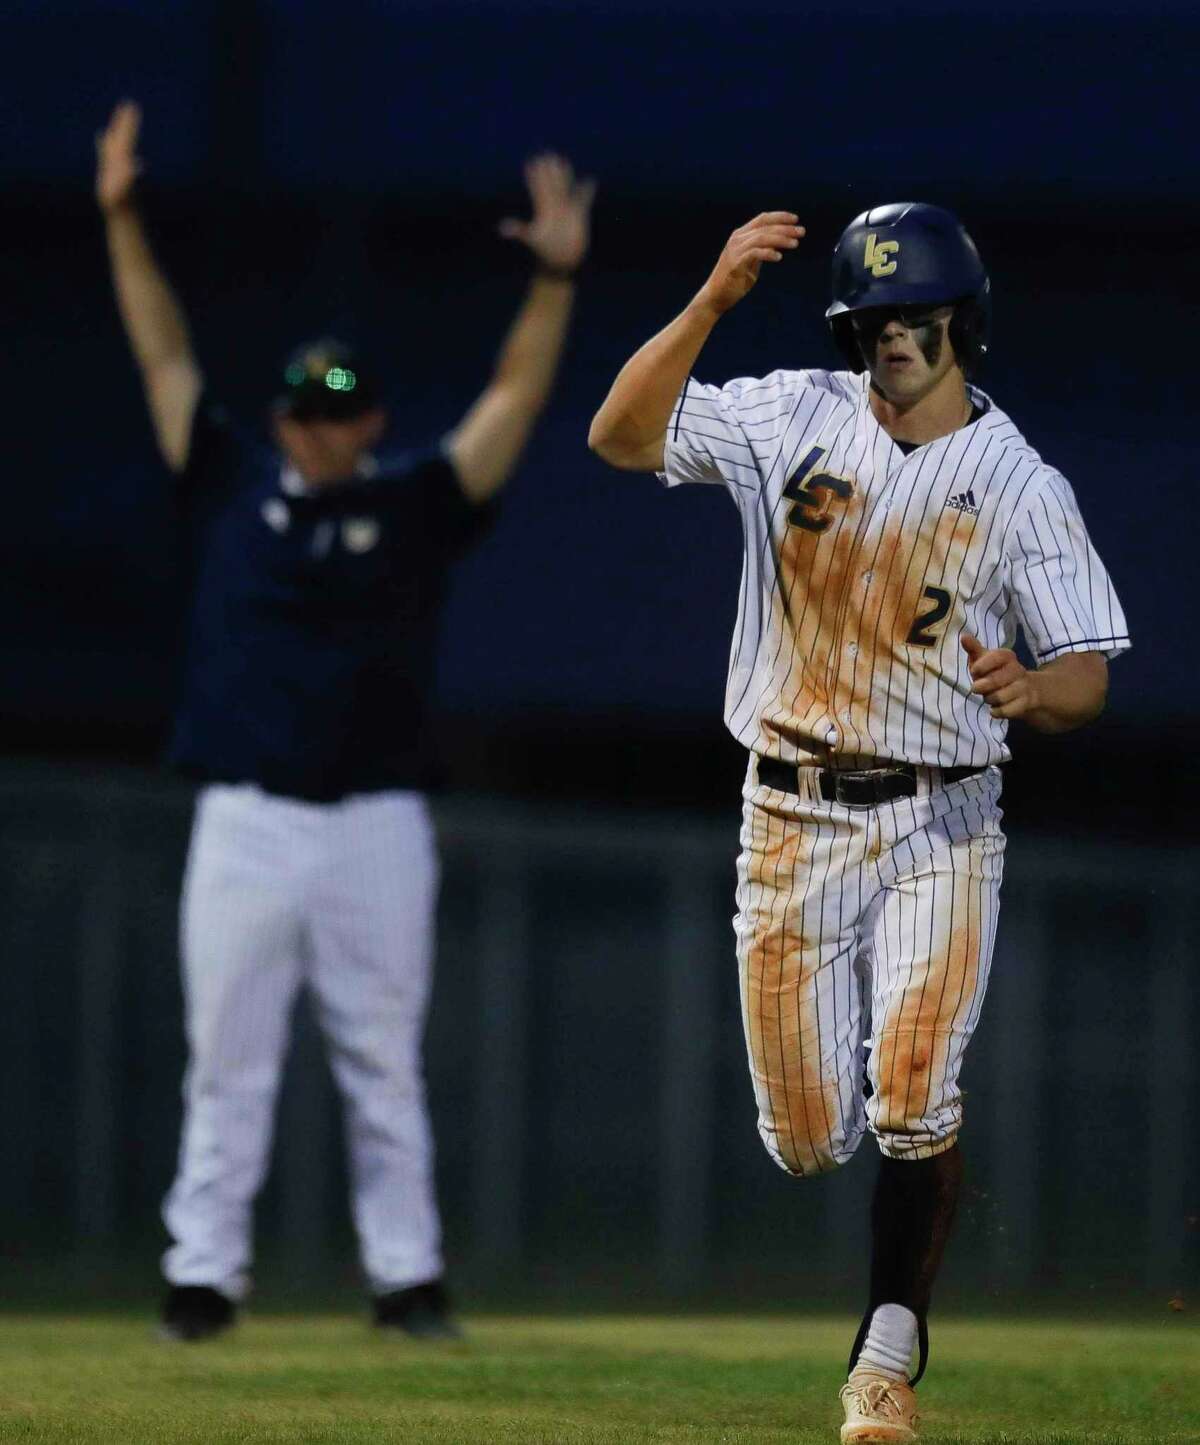 John Spikerman #2 of Lake Creek scores from second base after a thowing error during the fourth inning of a District 20-5A high school baseball game at Lake Creek High School, Tuesday, April 27, 2021, in Montgomery.